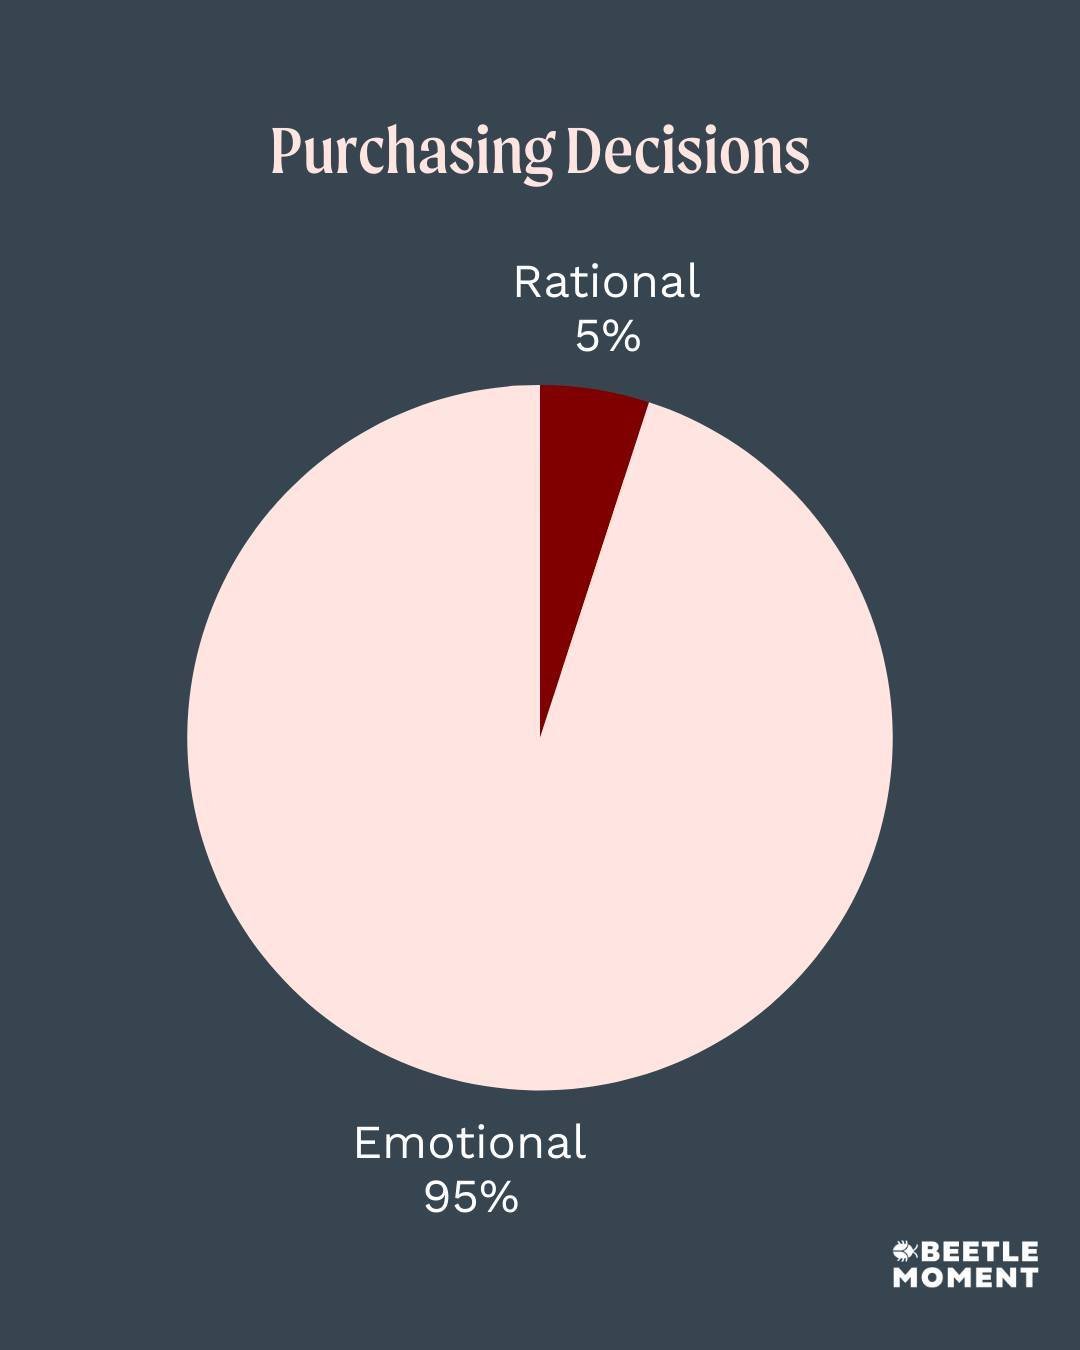 &ldquo;I don&rsquo;t chase, I attract.&rdquo;
-You (when your marketing works)

95% of purchase decision-making takes place in your audience's subconscious mind.

The biggest subconscious driver is emotion. Emotion (the heart &amp; gut) is what reall